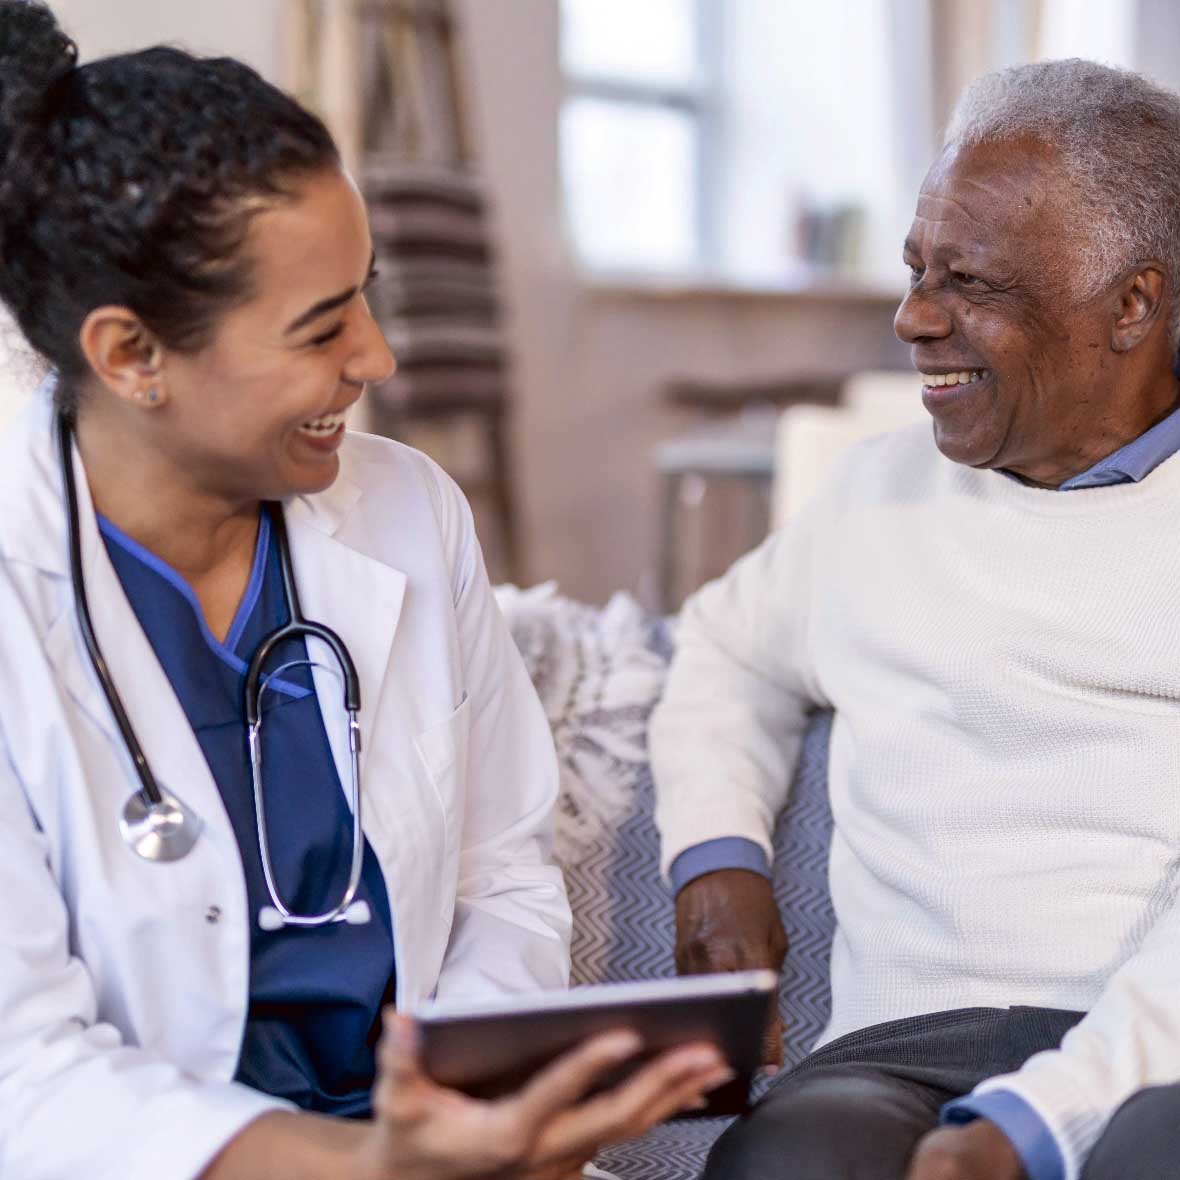 A female practitioner and an elderly male patient engaged in a happy conversation while reviewing health information on a tablet computer